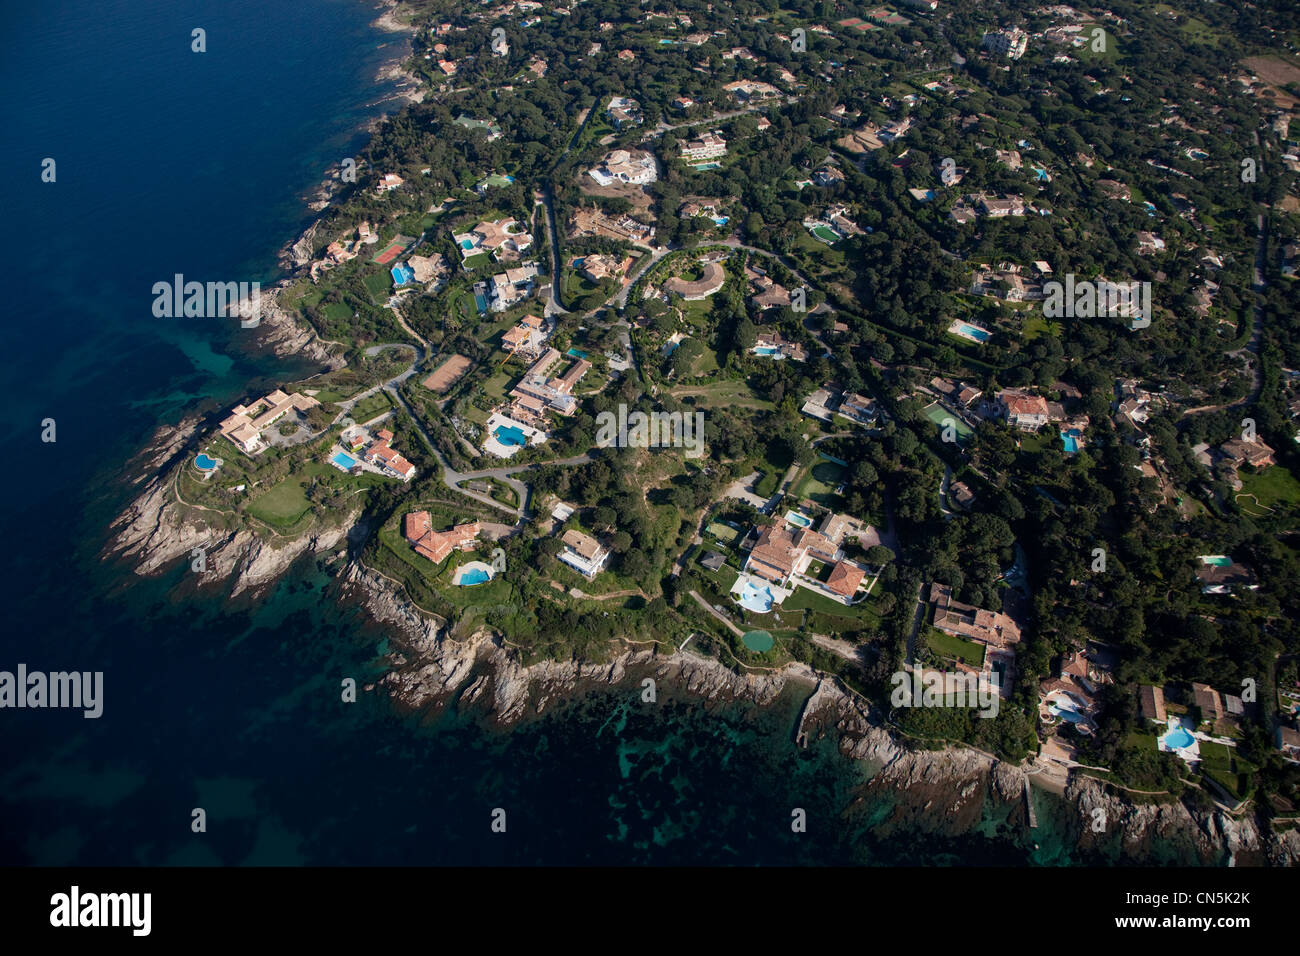 France, Var, St Tropez, Cap St Pierre and the tip of the Rabiou, Brigitte Bardot villa, Madrague the bottom of the image and Stock Photo